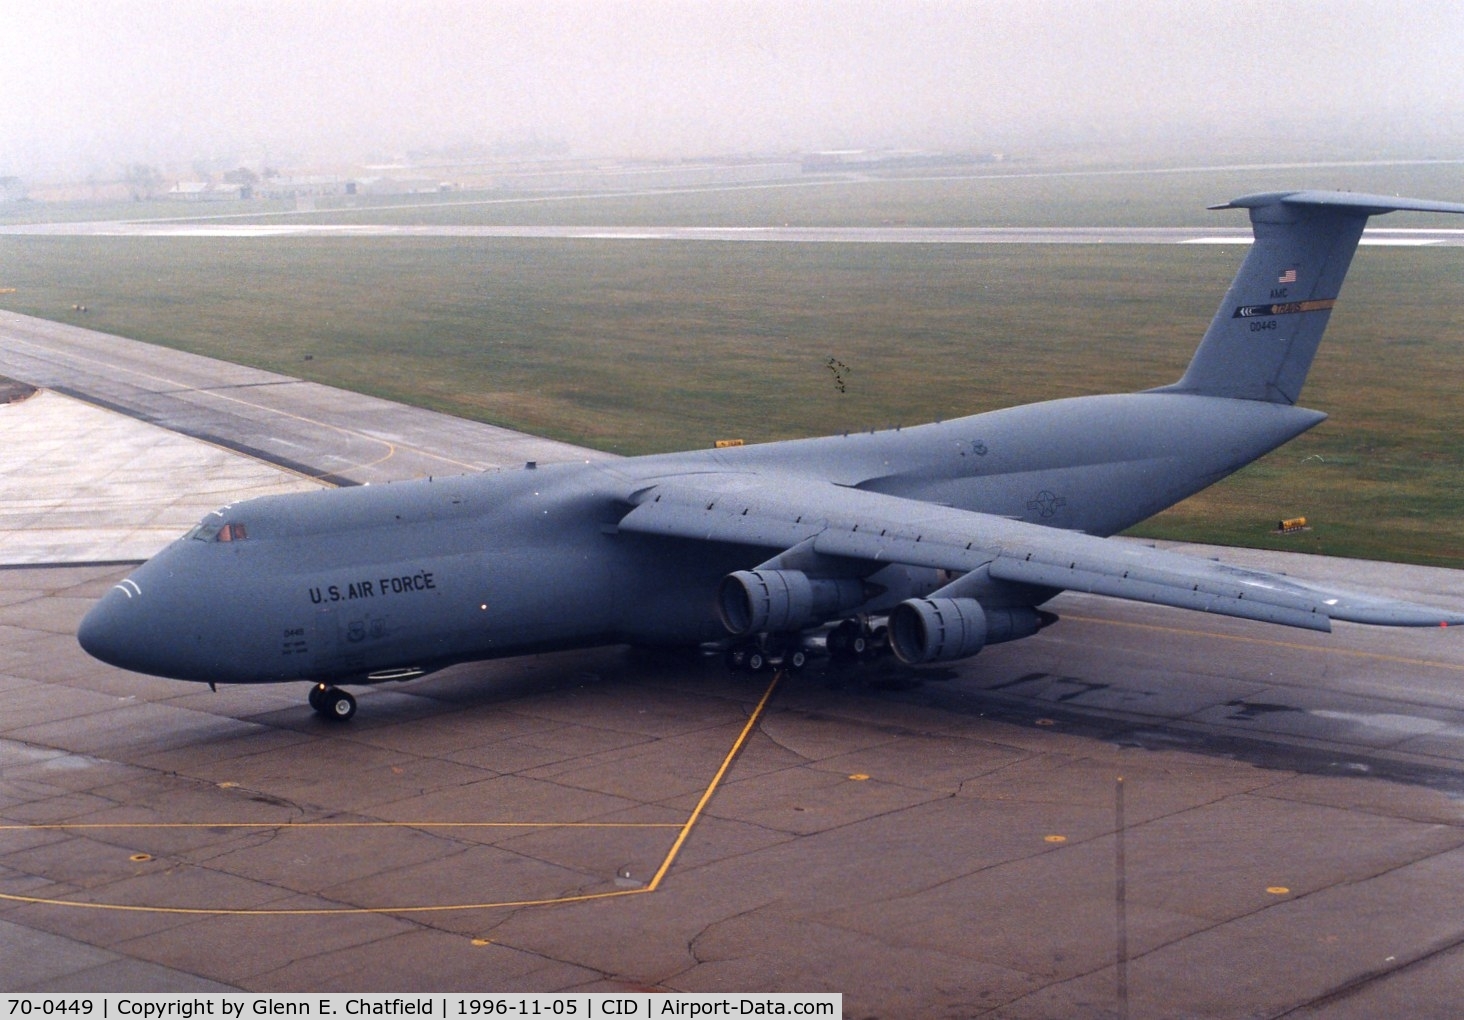 70-0449, 1970 Lockheed C-5A Galaxy C/N 500-0063, C-5A parking at the base of the control tower